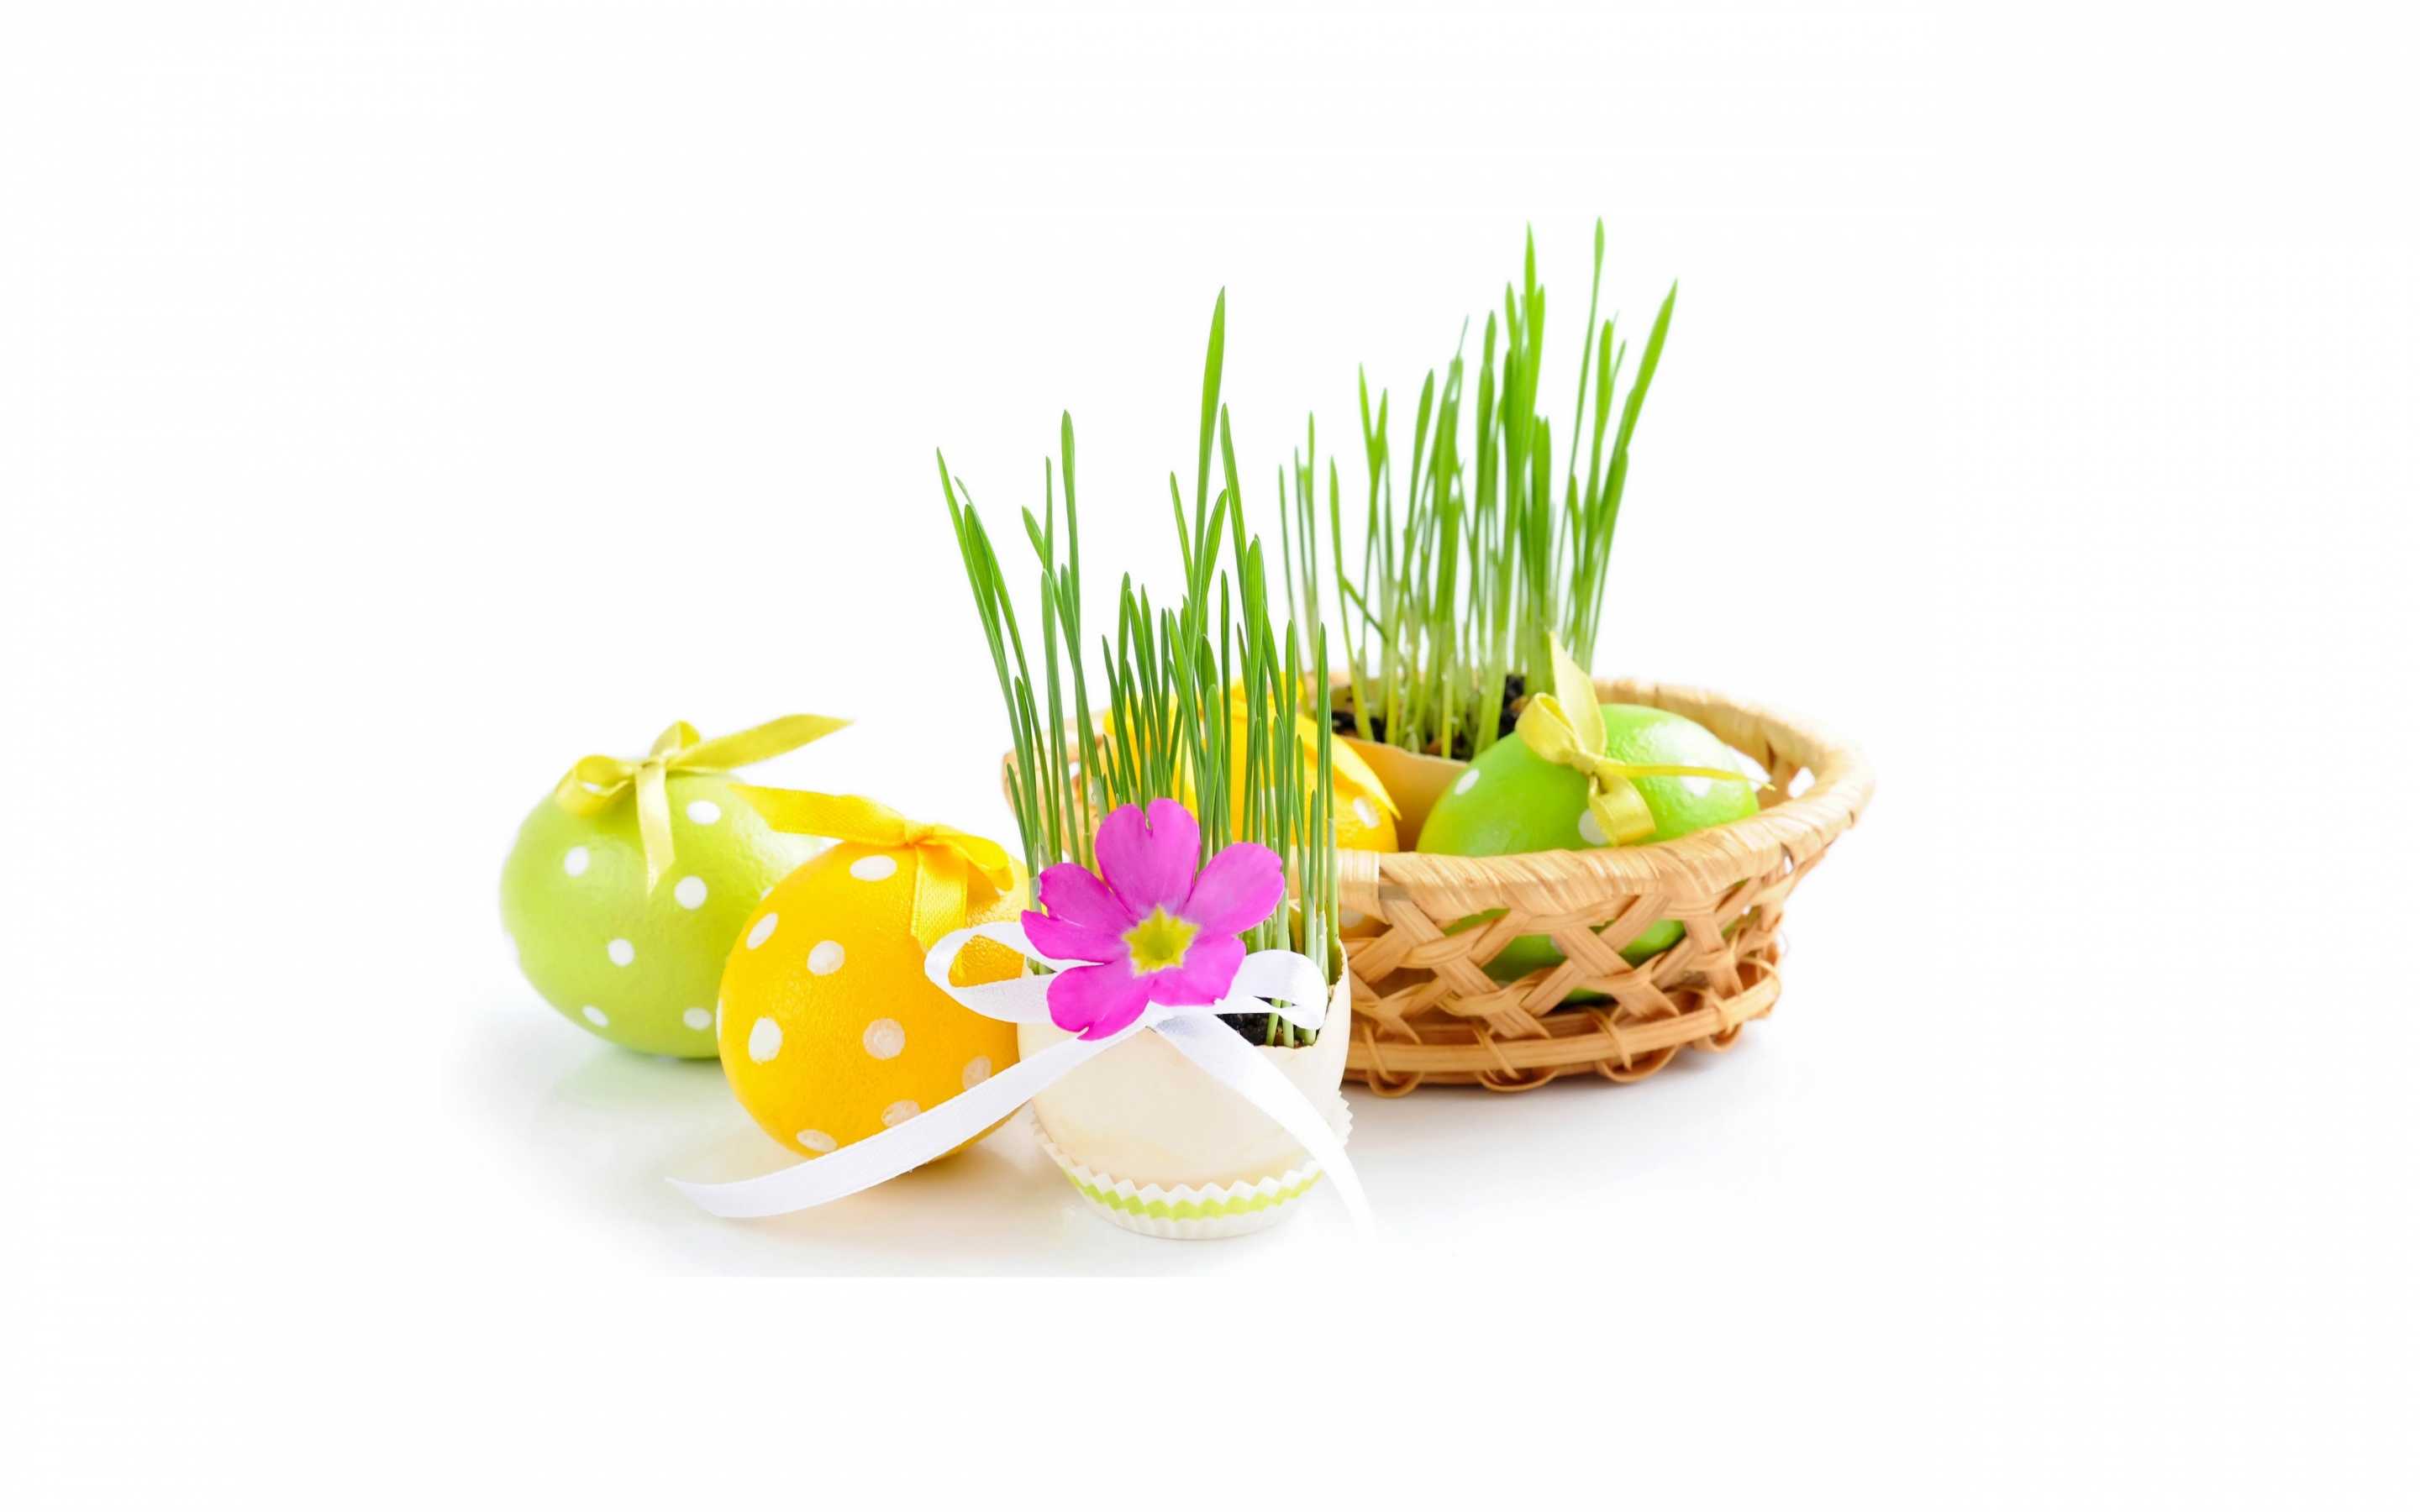 Easter Eggs And Decoration